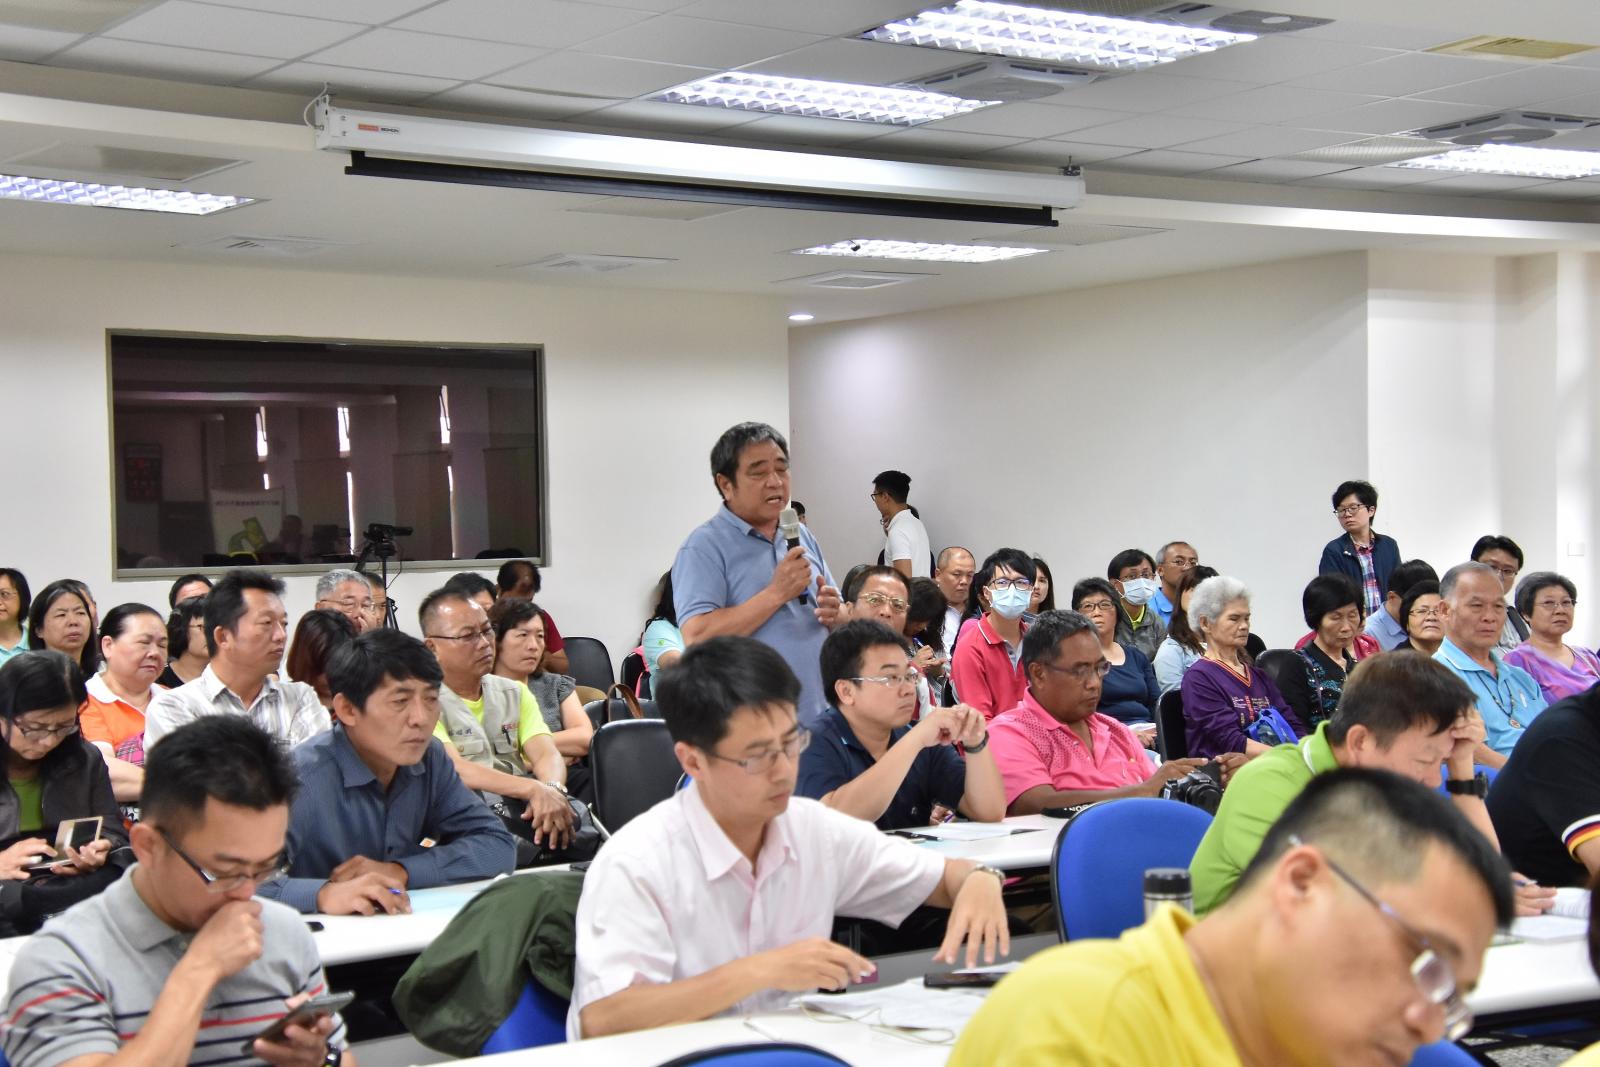 People from various organizations in Taitung attended the event.